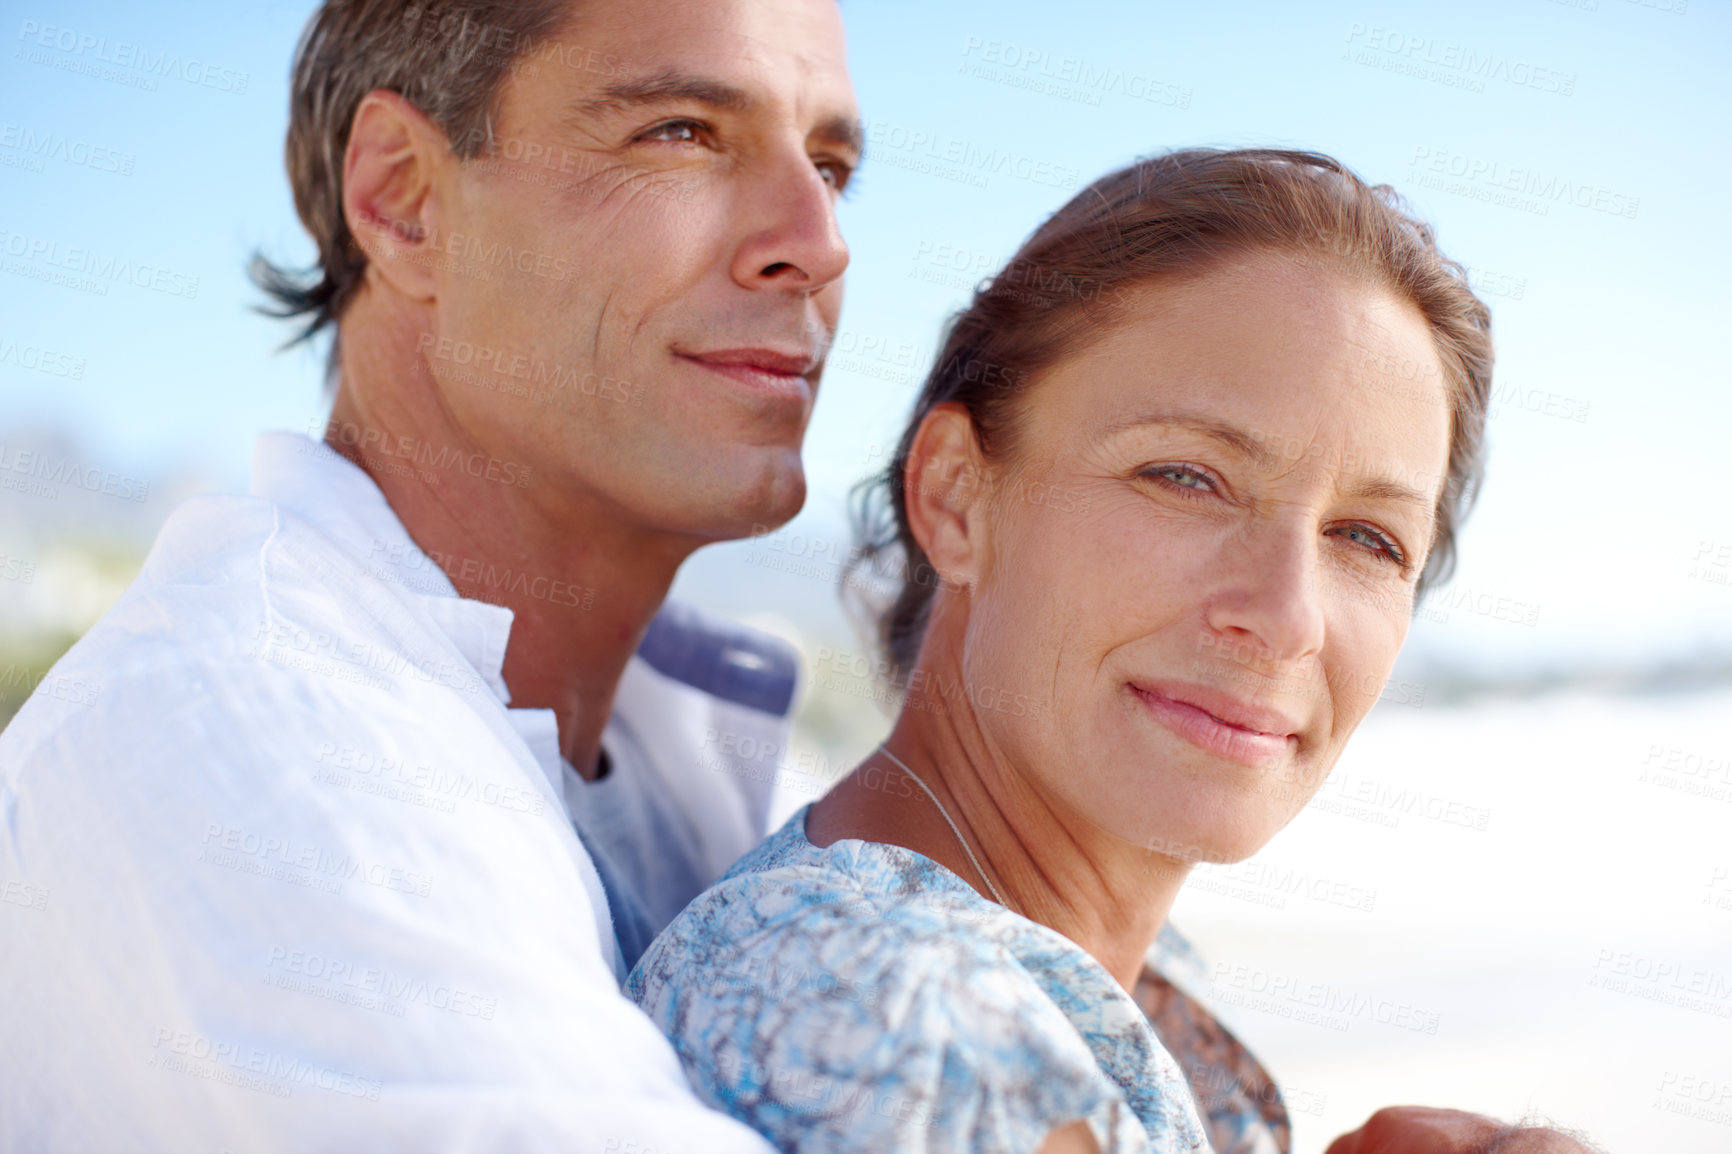 Buy stock photo Portrait of a mature man embracing his happy wife from behind as they stand on the beach